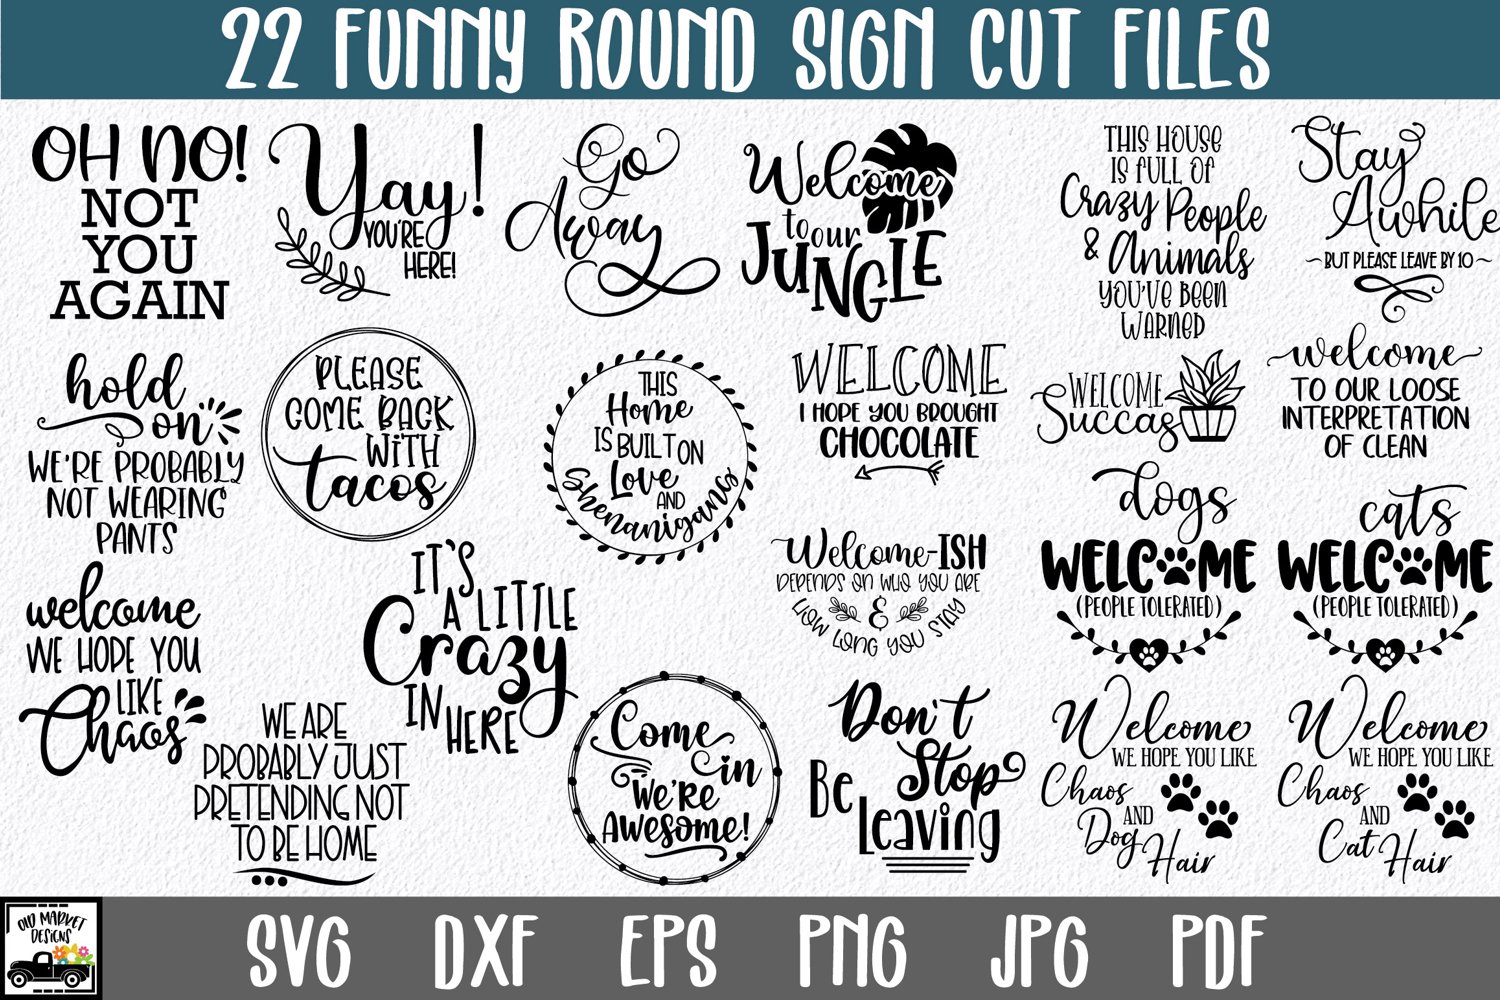 This bundle includes 22 funny round sign cut files.